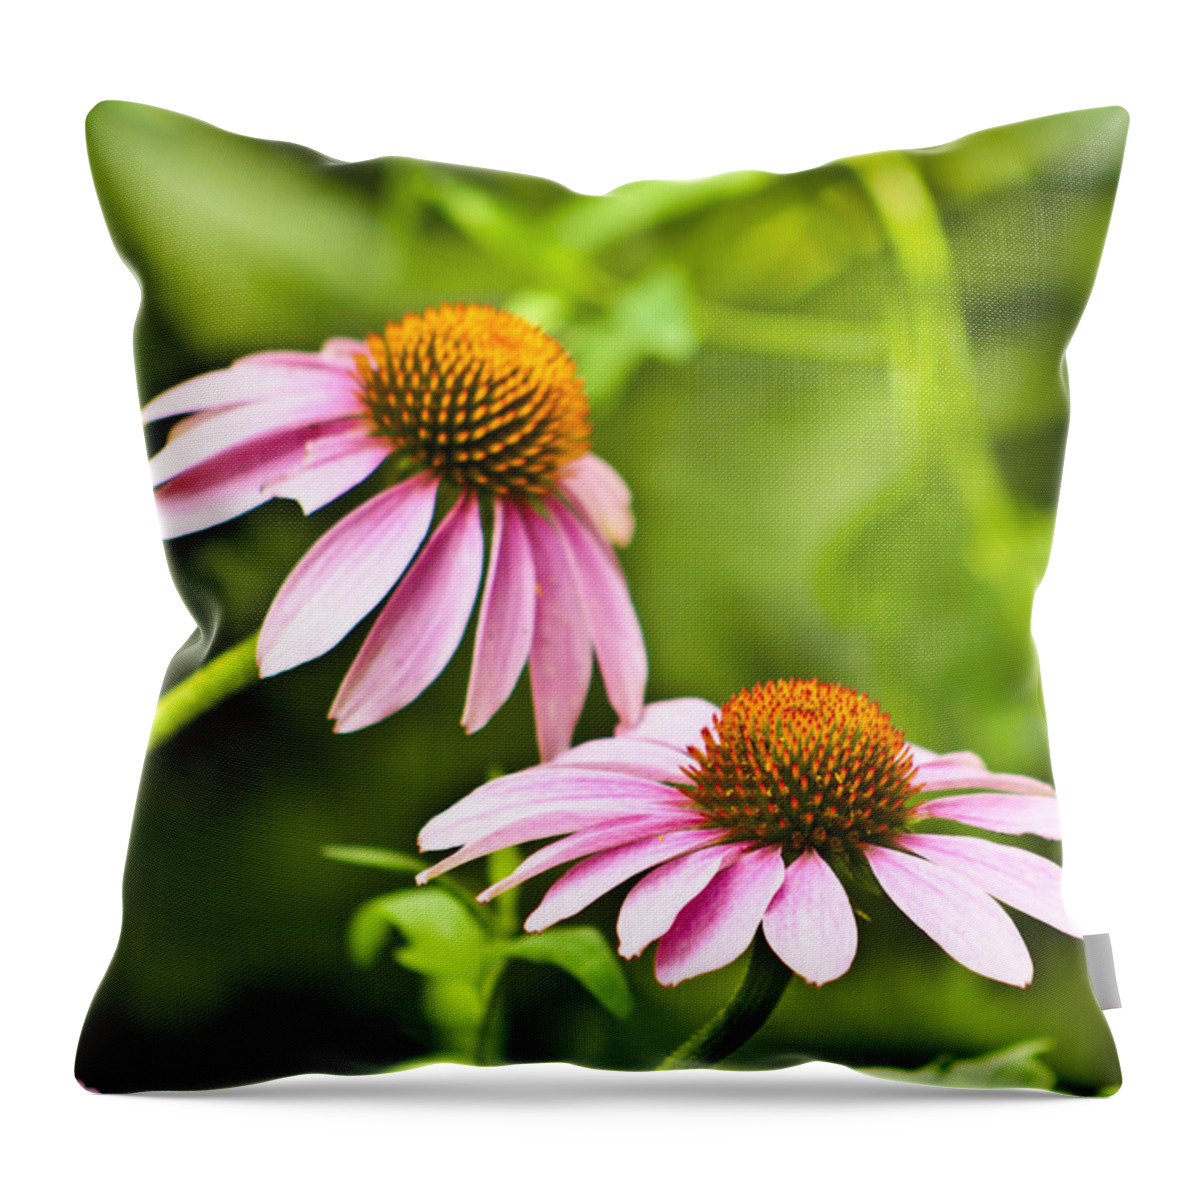 Flowers Throw Pillow featuring the photograph Pink Flowers by Scott Wood